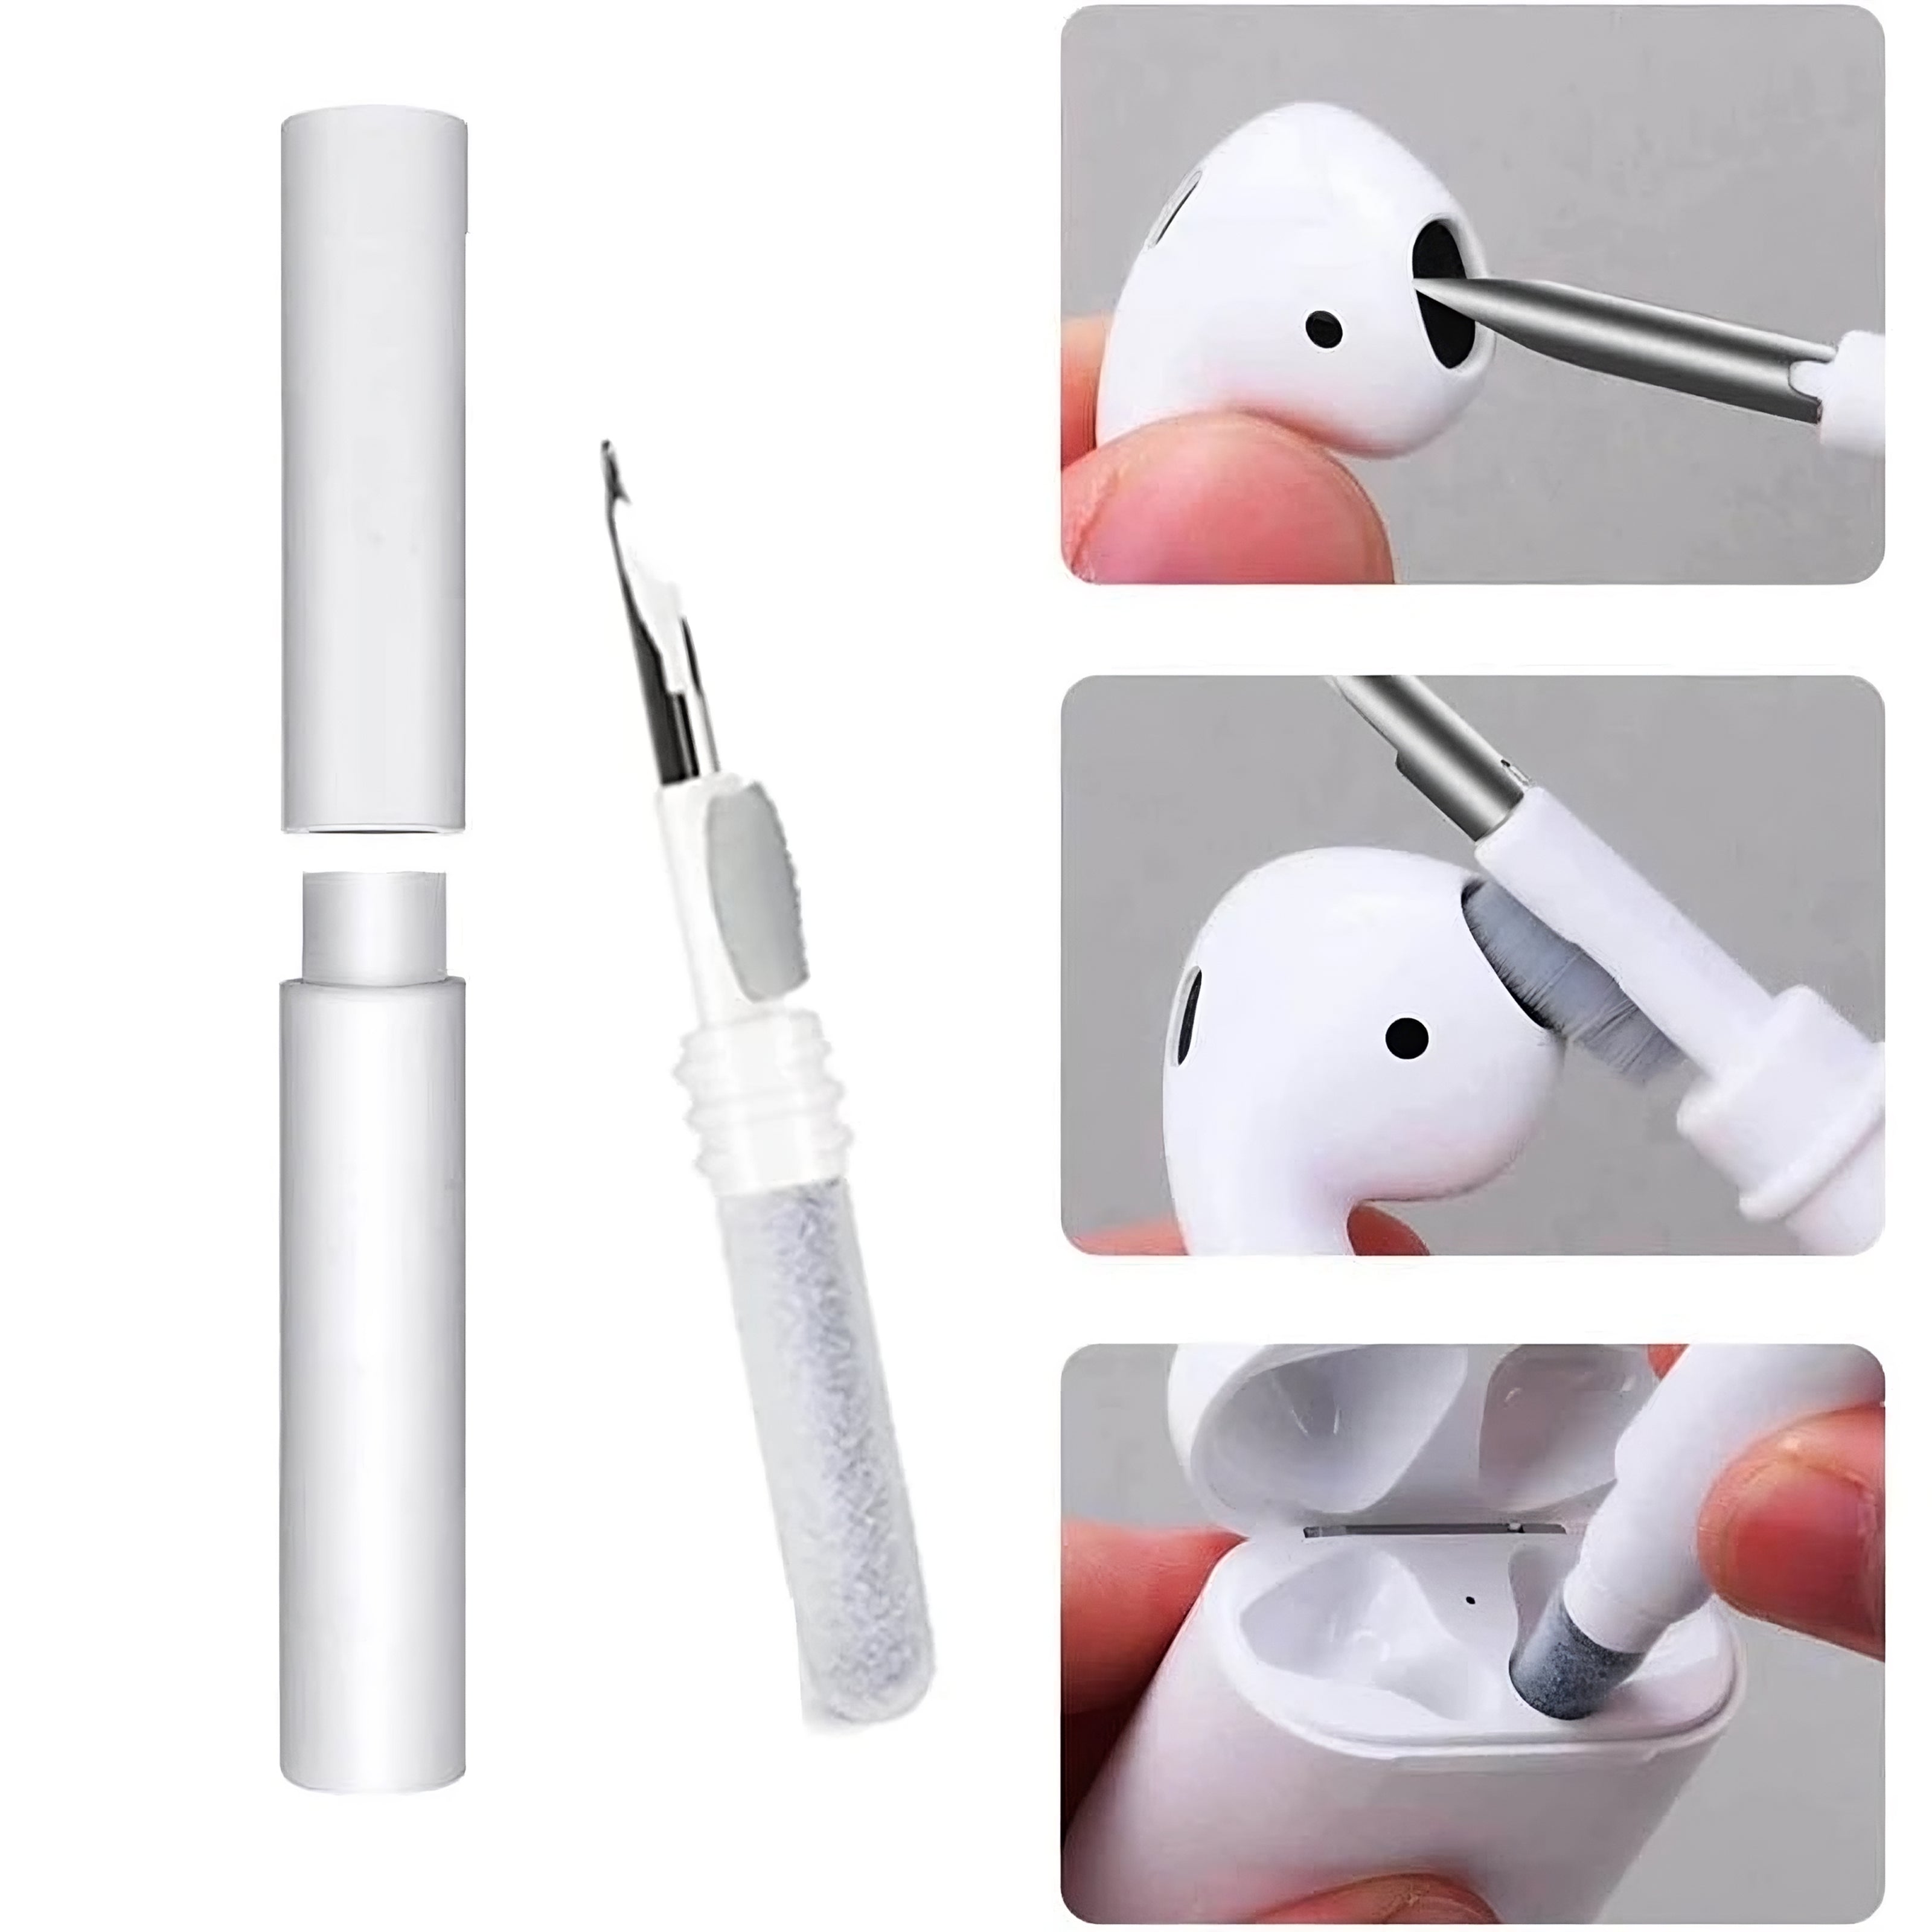 Airpods Cleaner